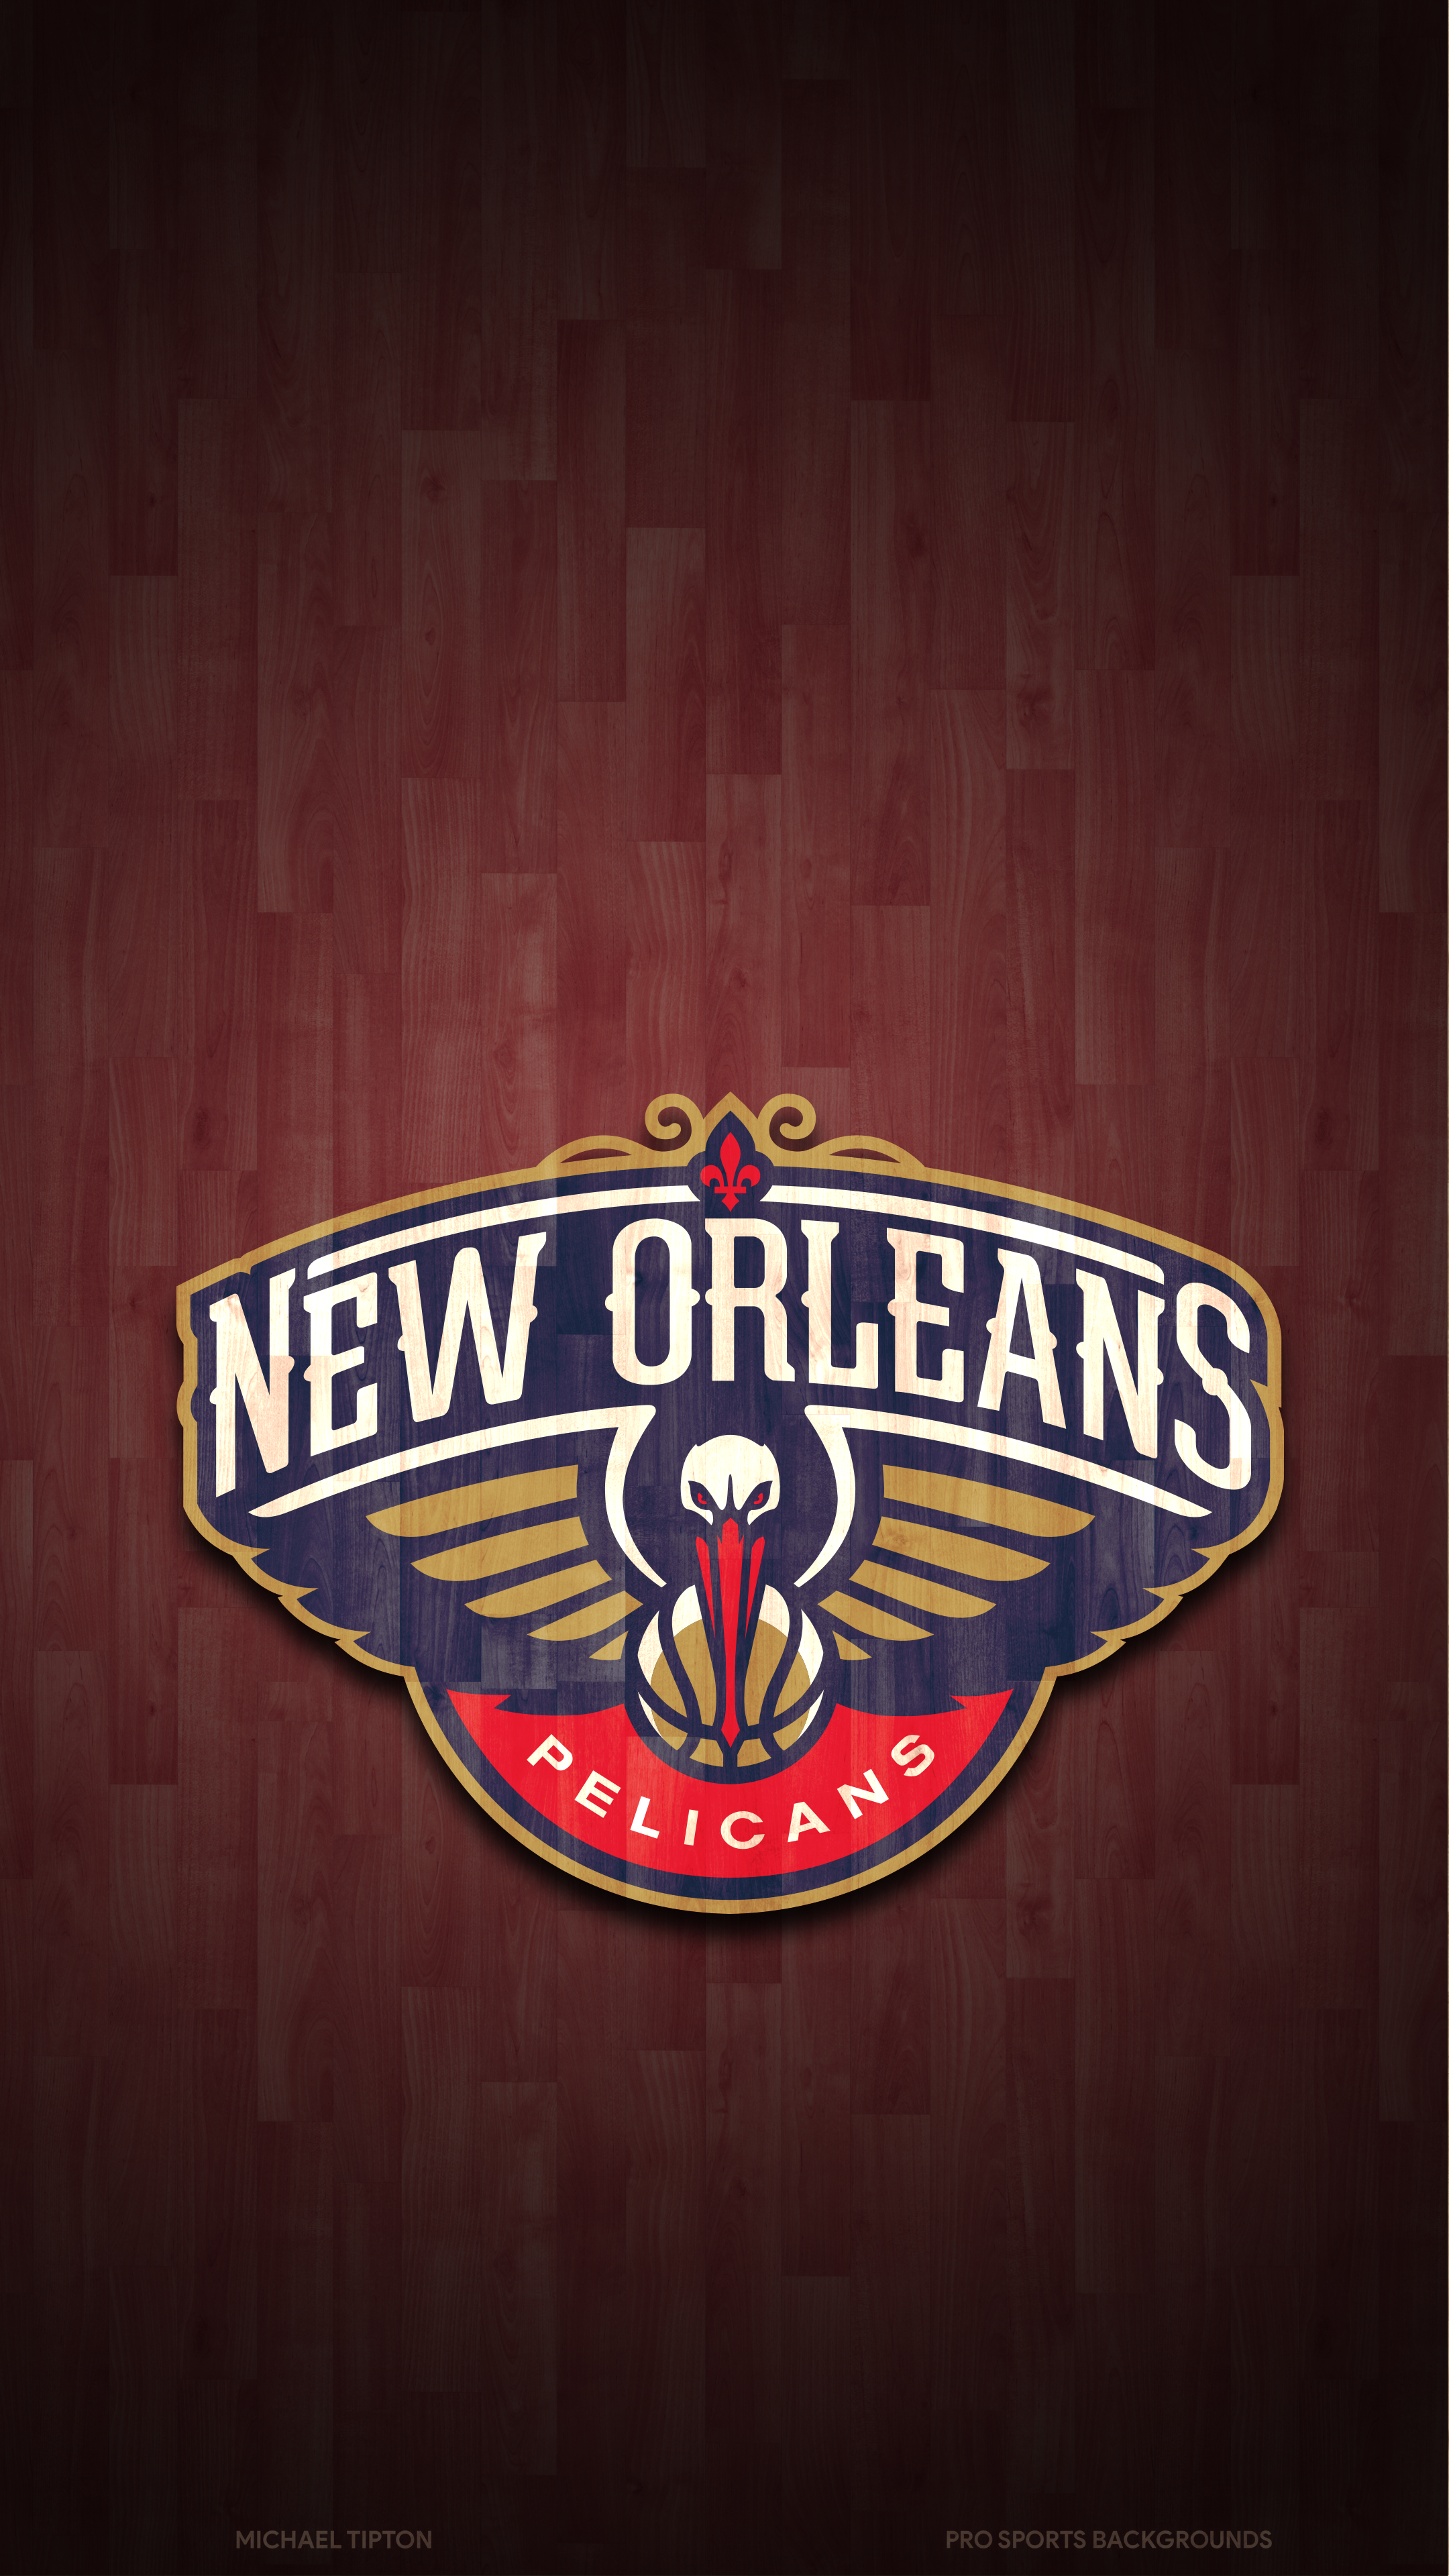 New orleans pelicans wallpapers â pro sports backgrounds new orleans pelicans new orleans nba teams